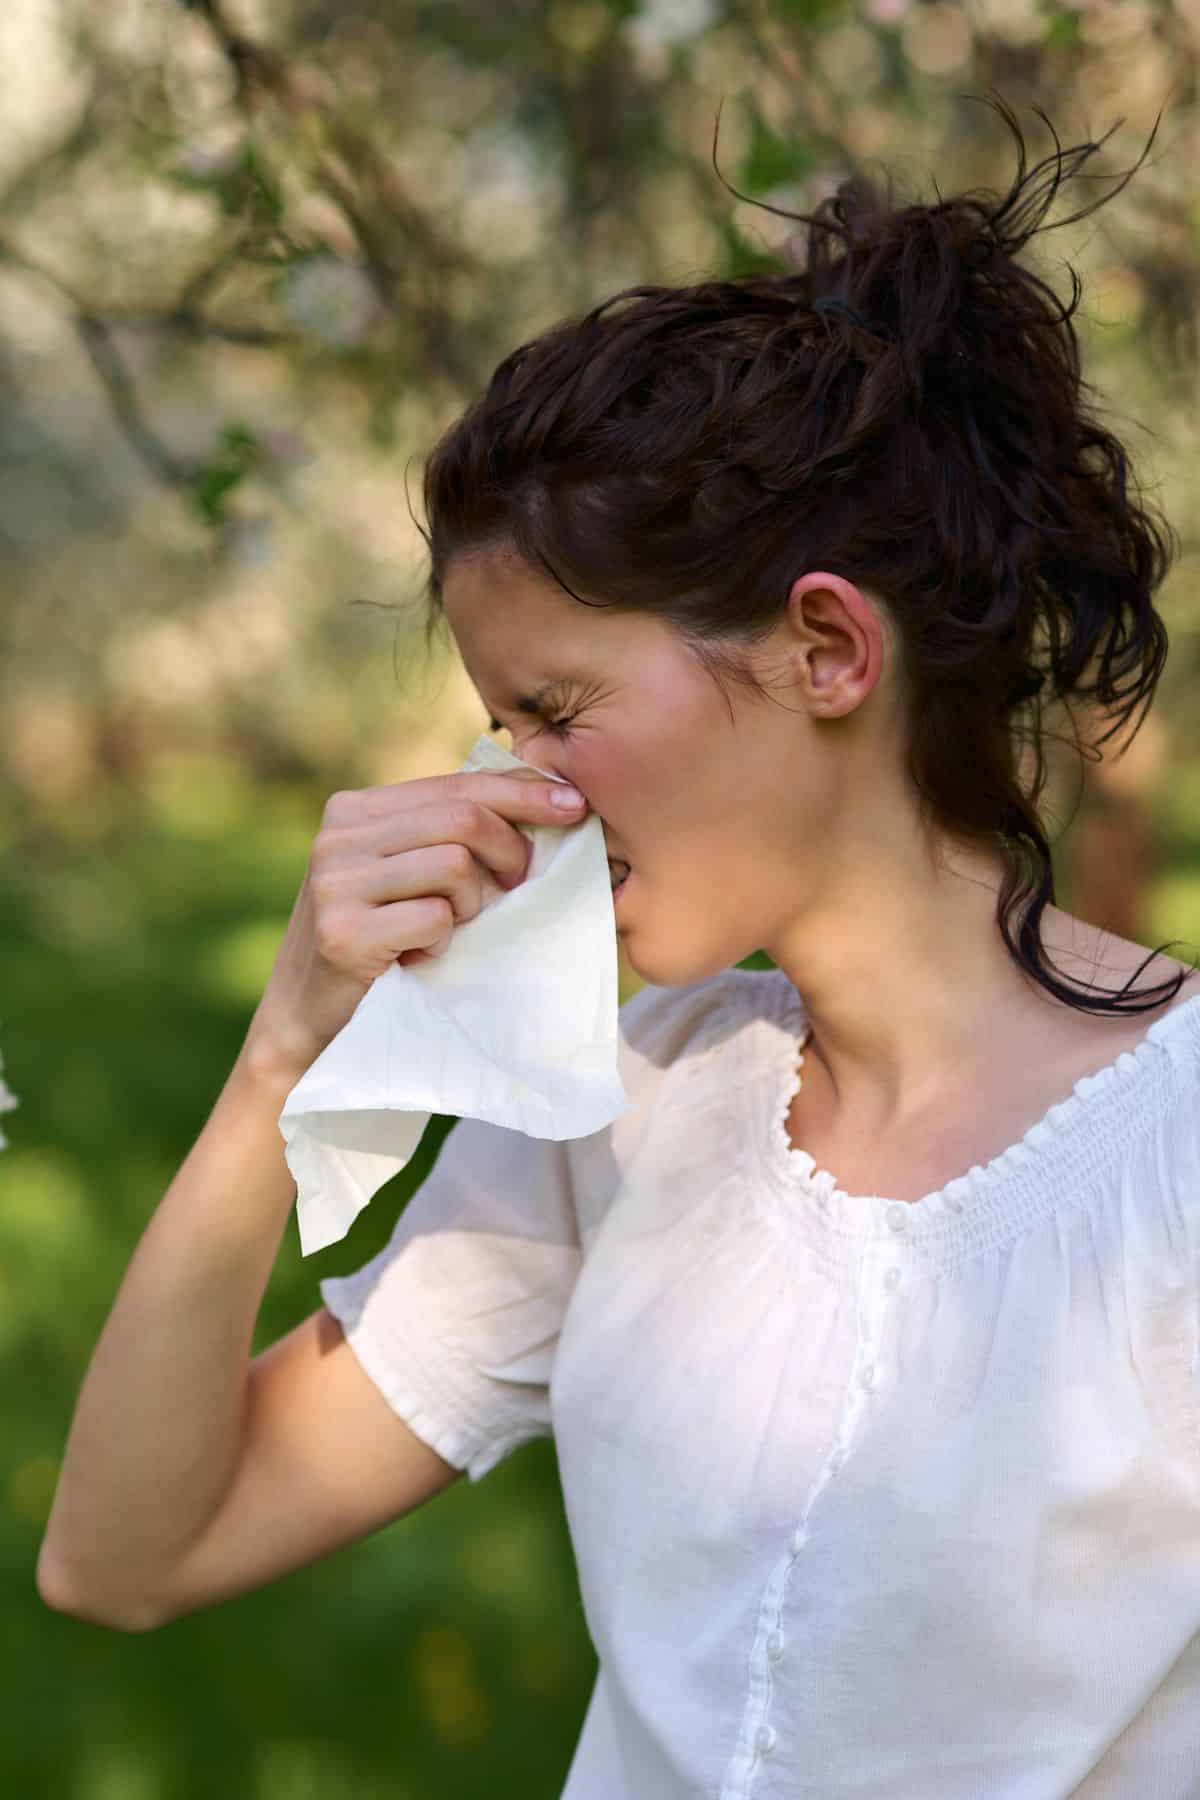 a woman outside holding her nose with a tissue and squinting her eyes.